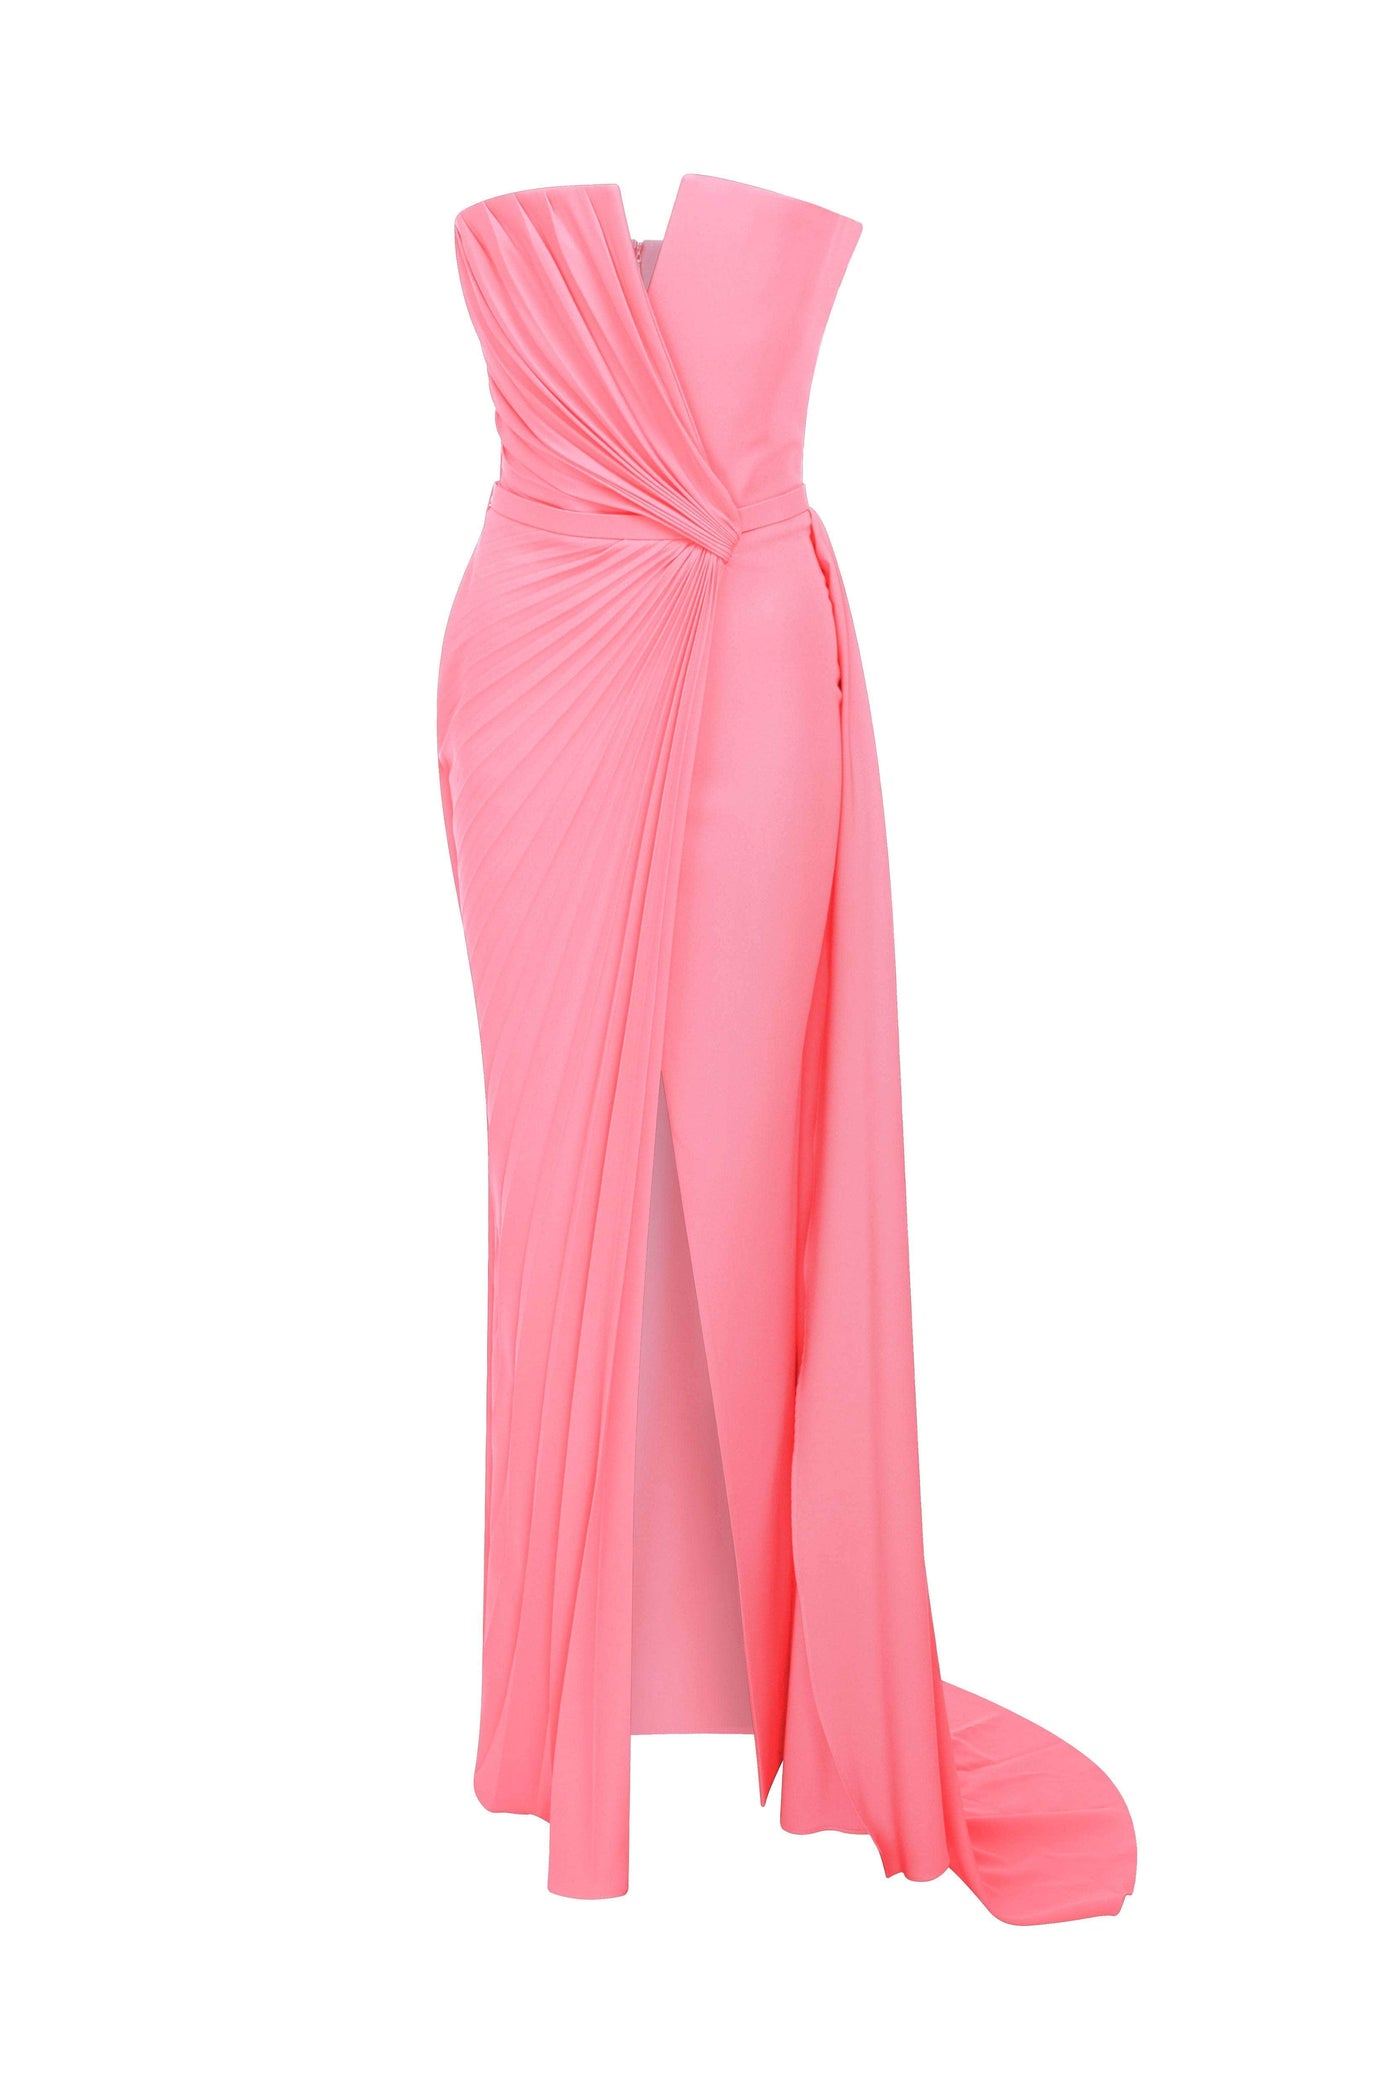 MNM COUTURE N0532 - V-Neck Gown